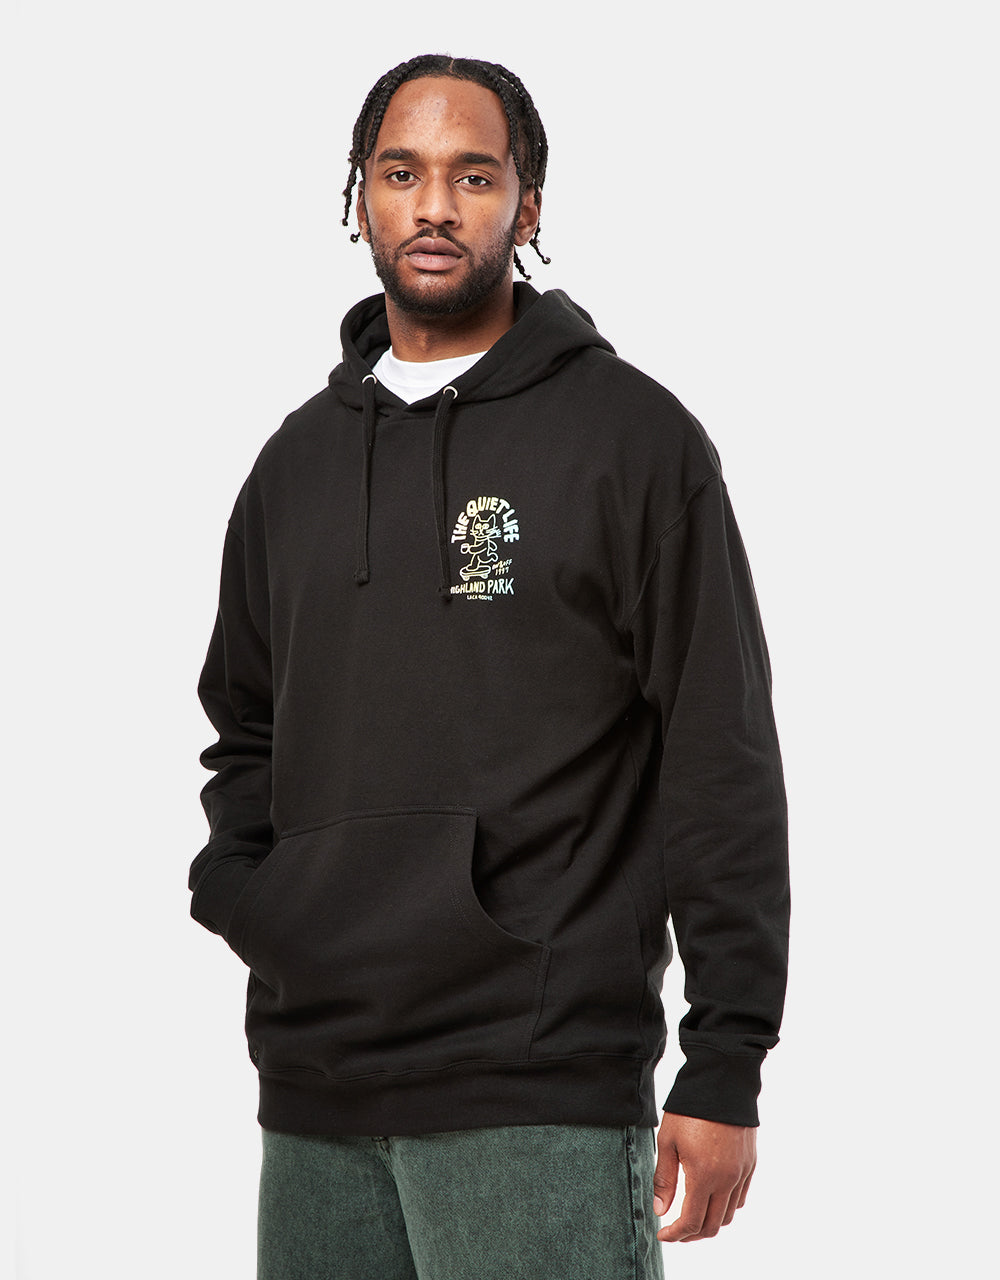 The Quiet Life Skating Cat Pullover Hoodie - Black